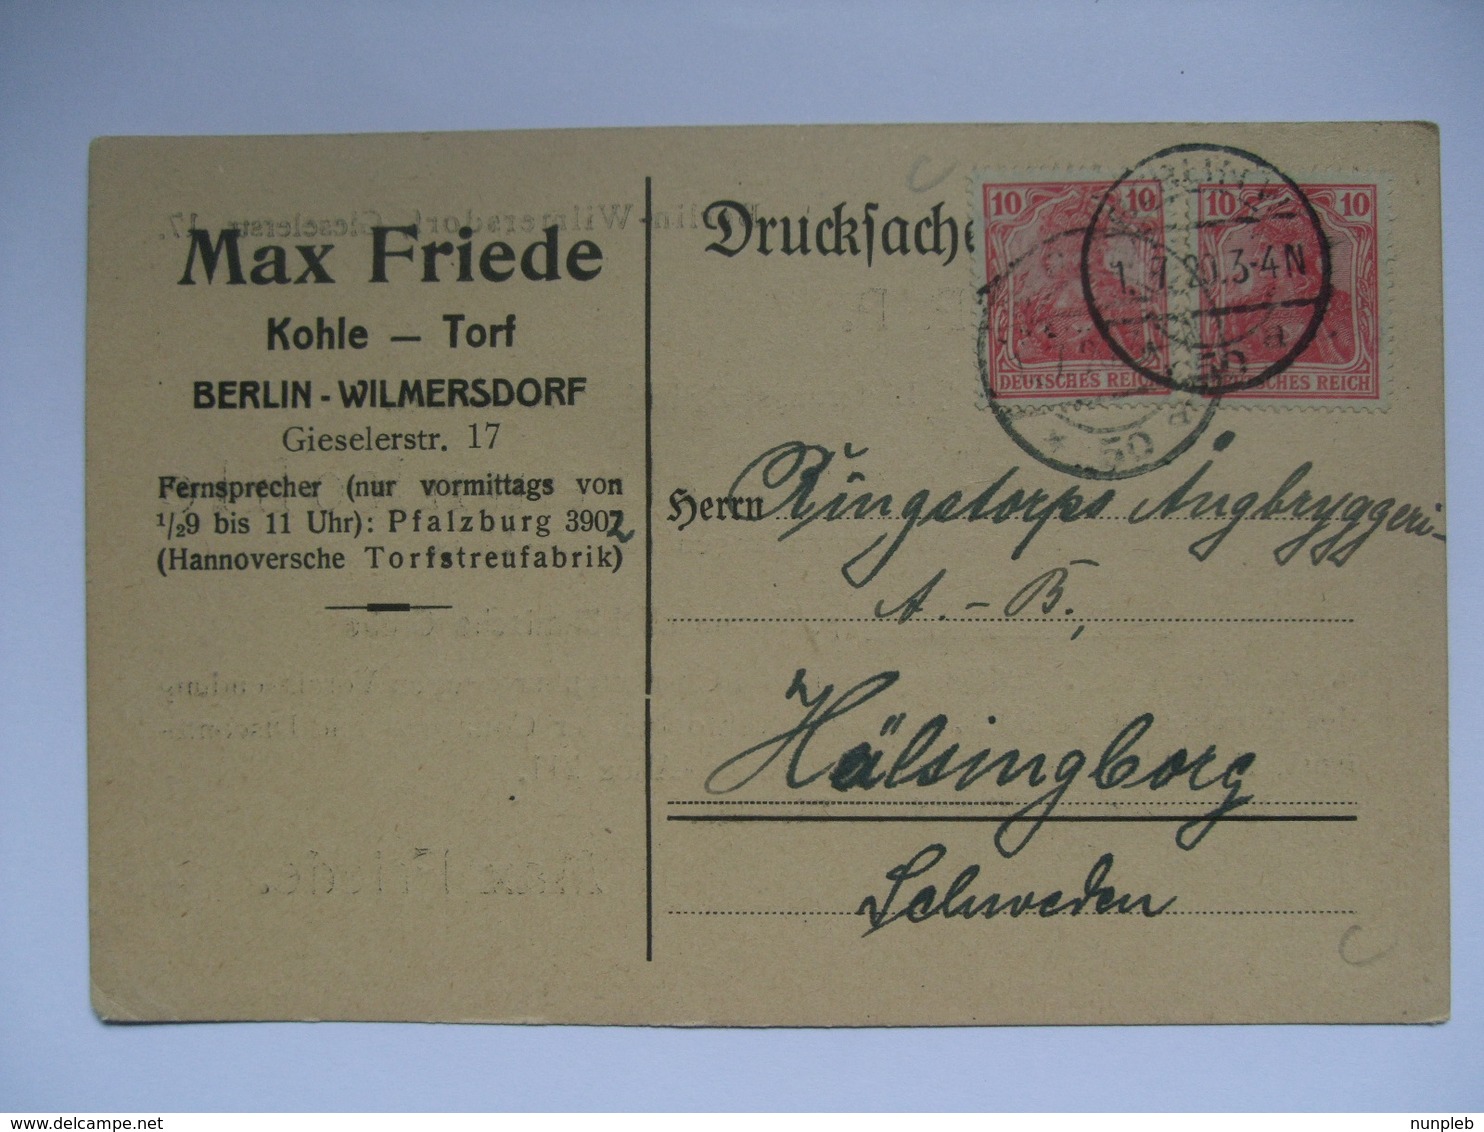 GERMANY - November 1920 Postcard  - Berlin To Halsingborg Sweden - Max Friede - Covers & Documents